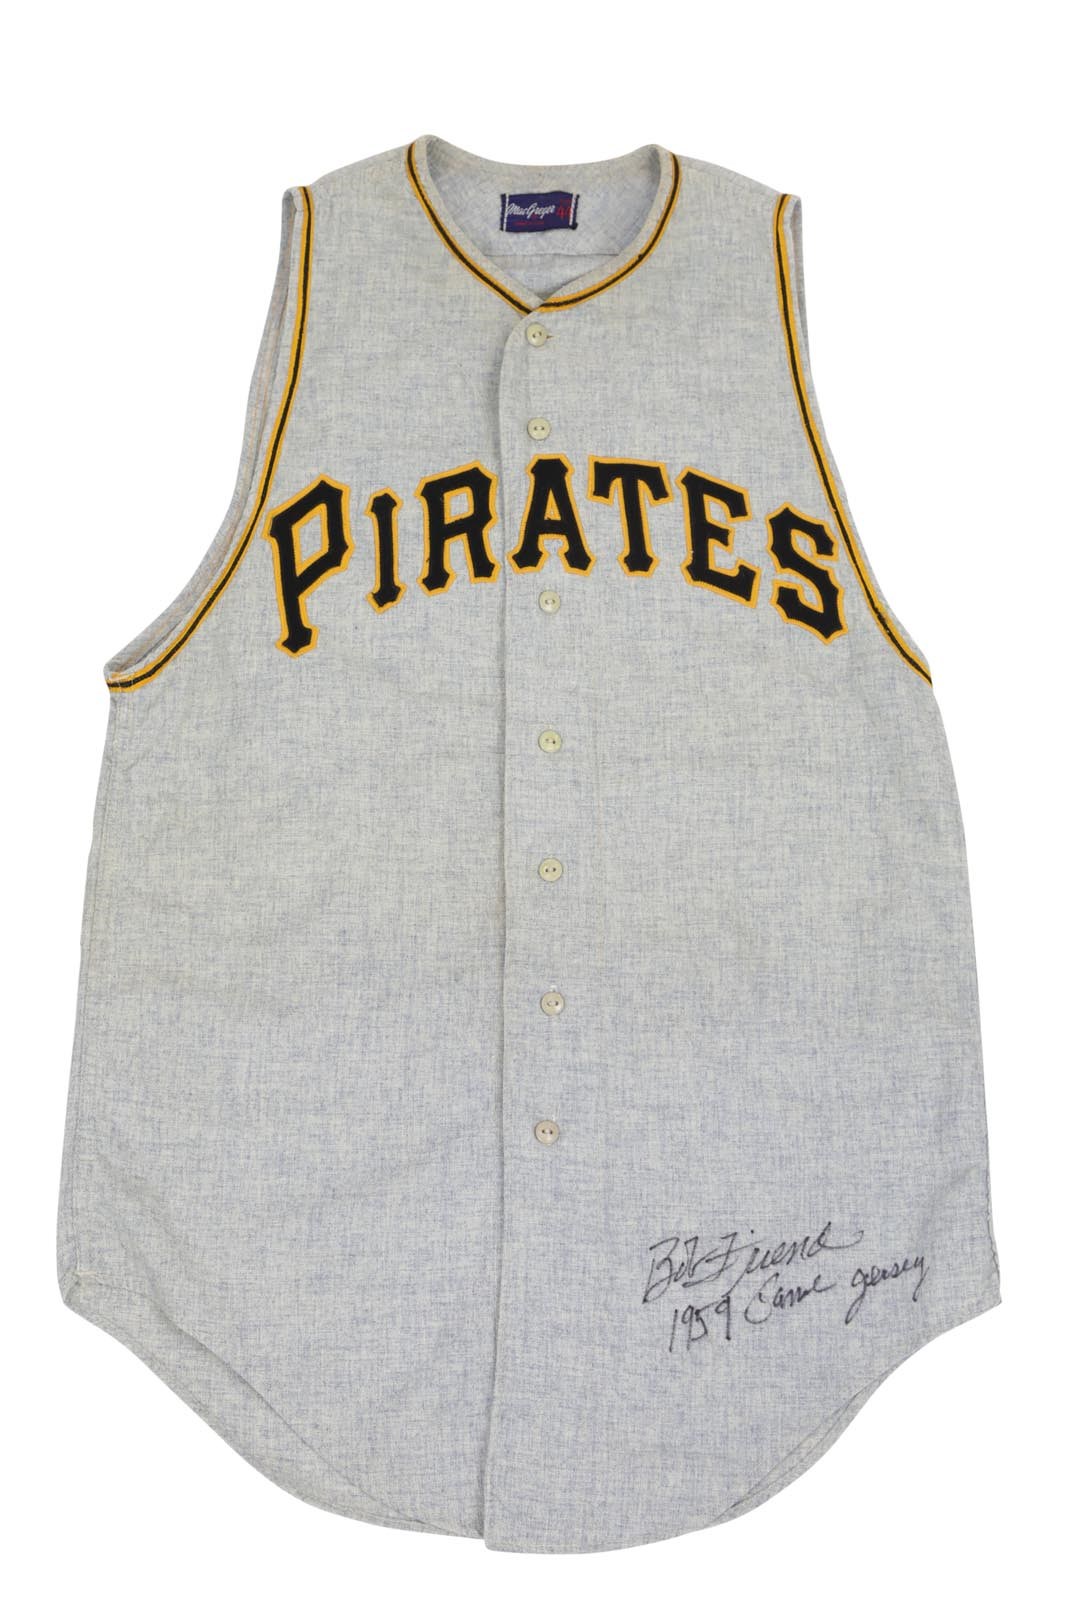 Clemente and Pittsburgh Pirates - 1959 Bob Friend Pittsburgh Pirates Game Worn Jersey